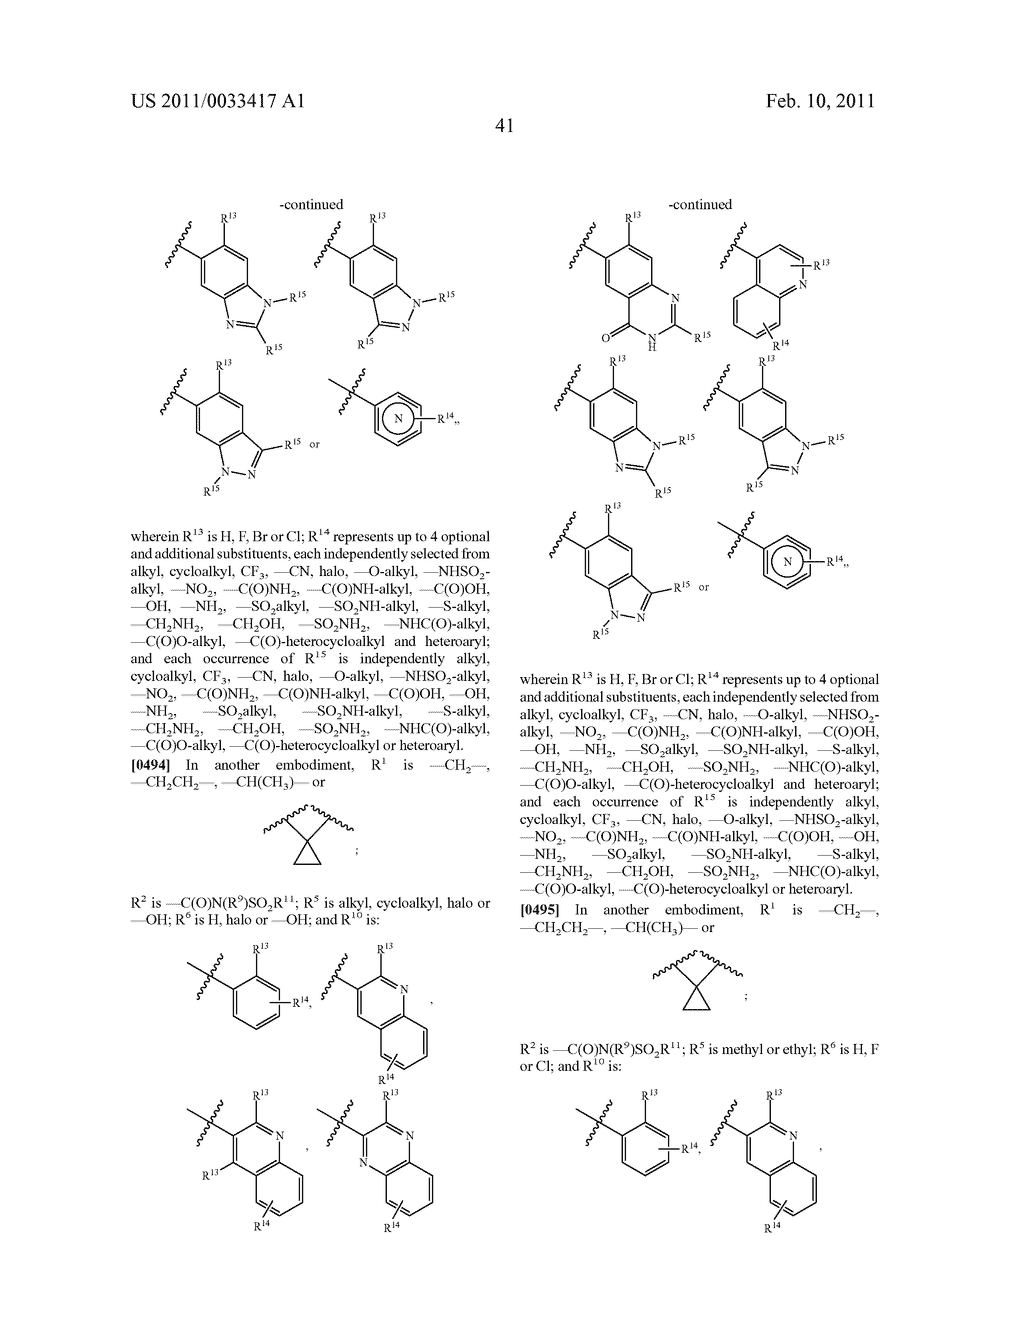 2,3-SUBSTITUTED INDOLE DERIVATIVES FOR TREATING VIRAL INFECTIONS - diagram, schematic, and image 42